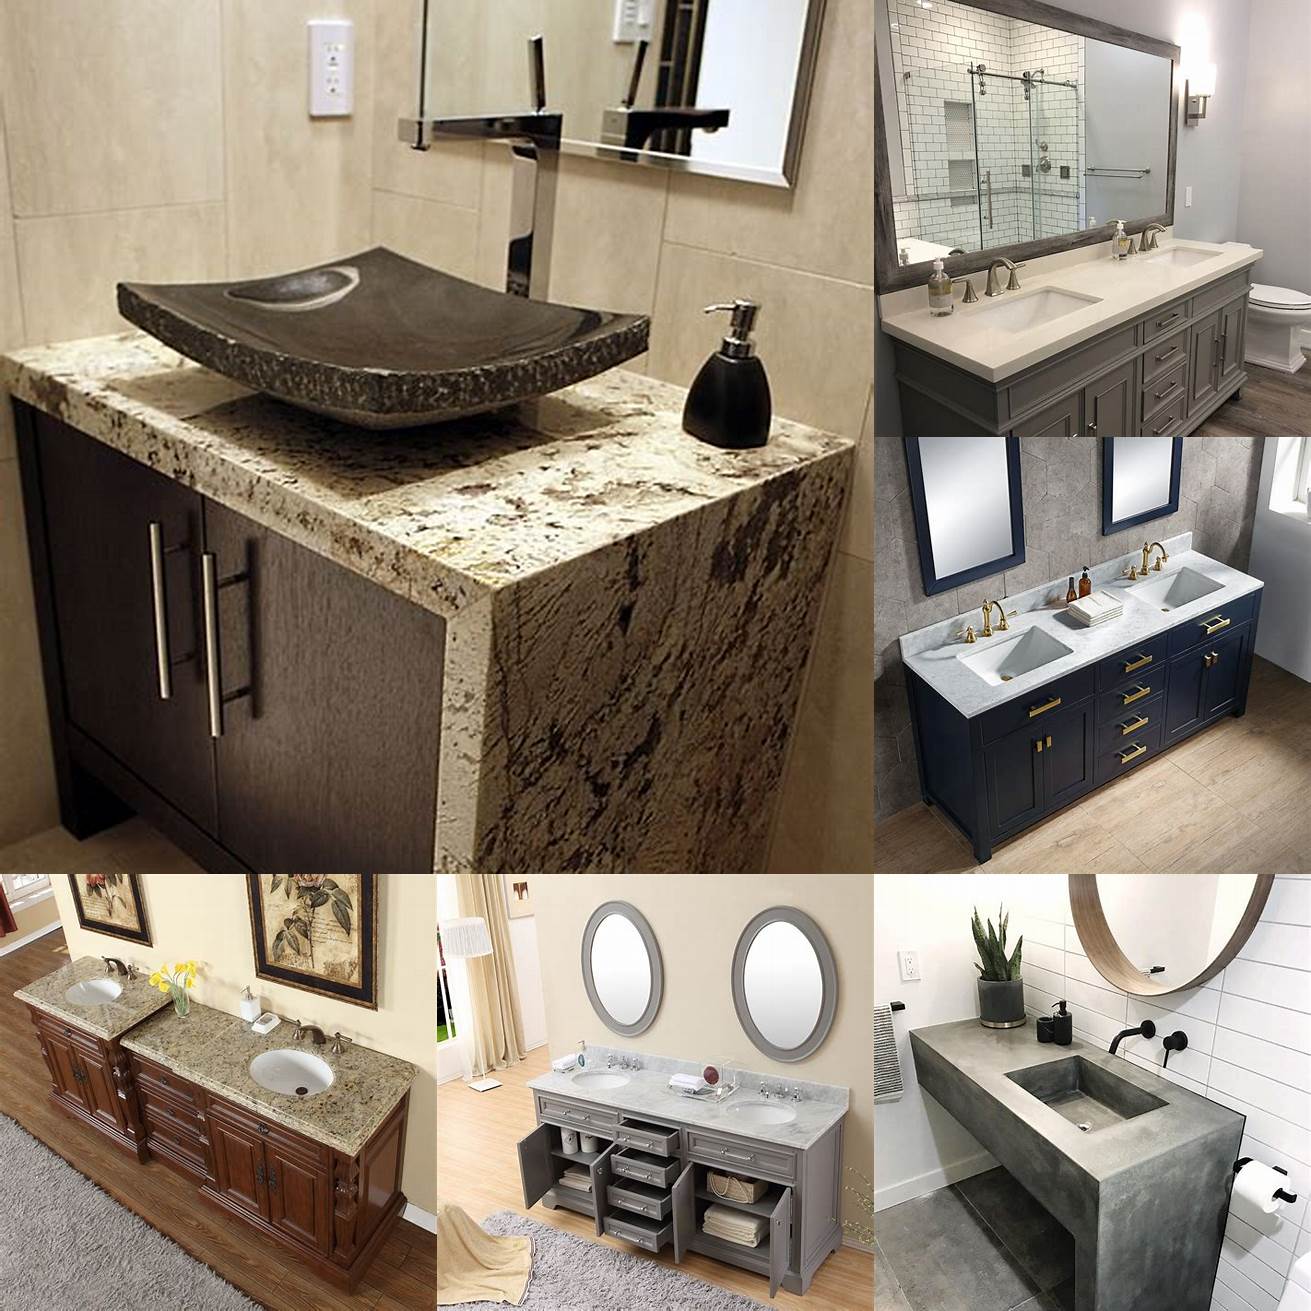 A double sink bathroom vanity top with a waterfall edge